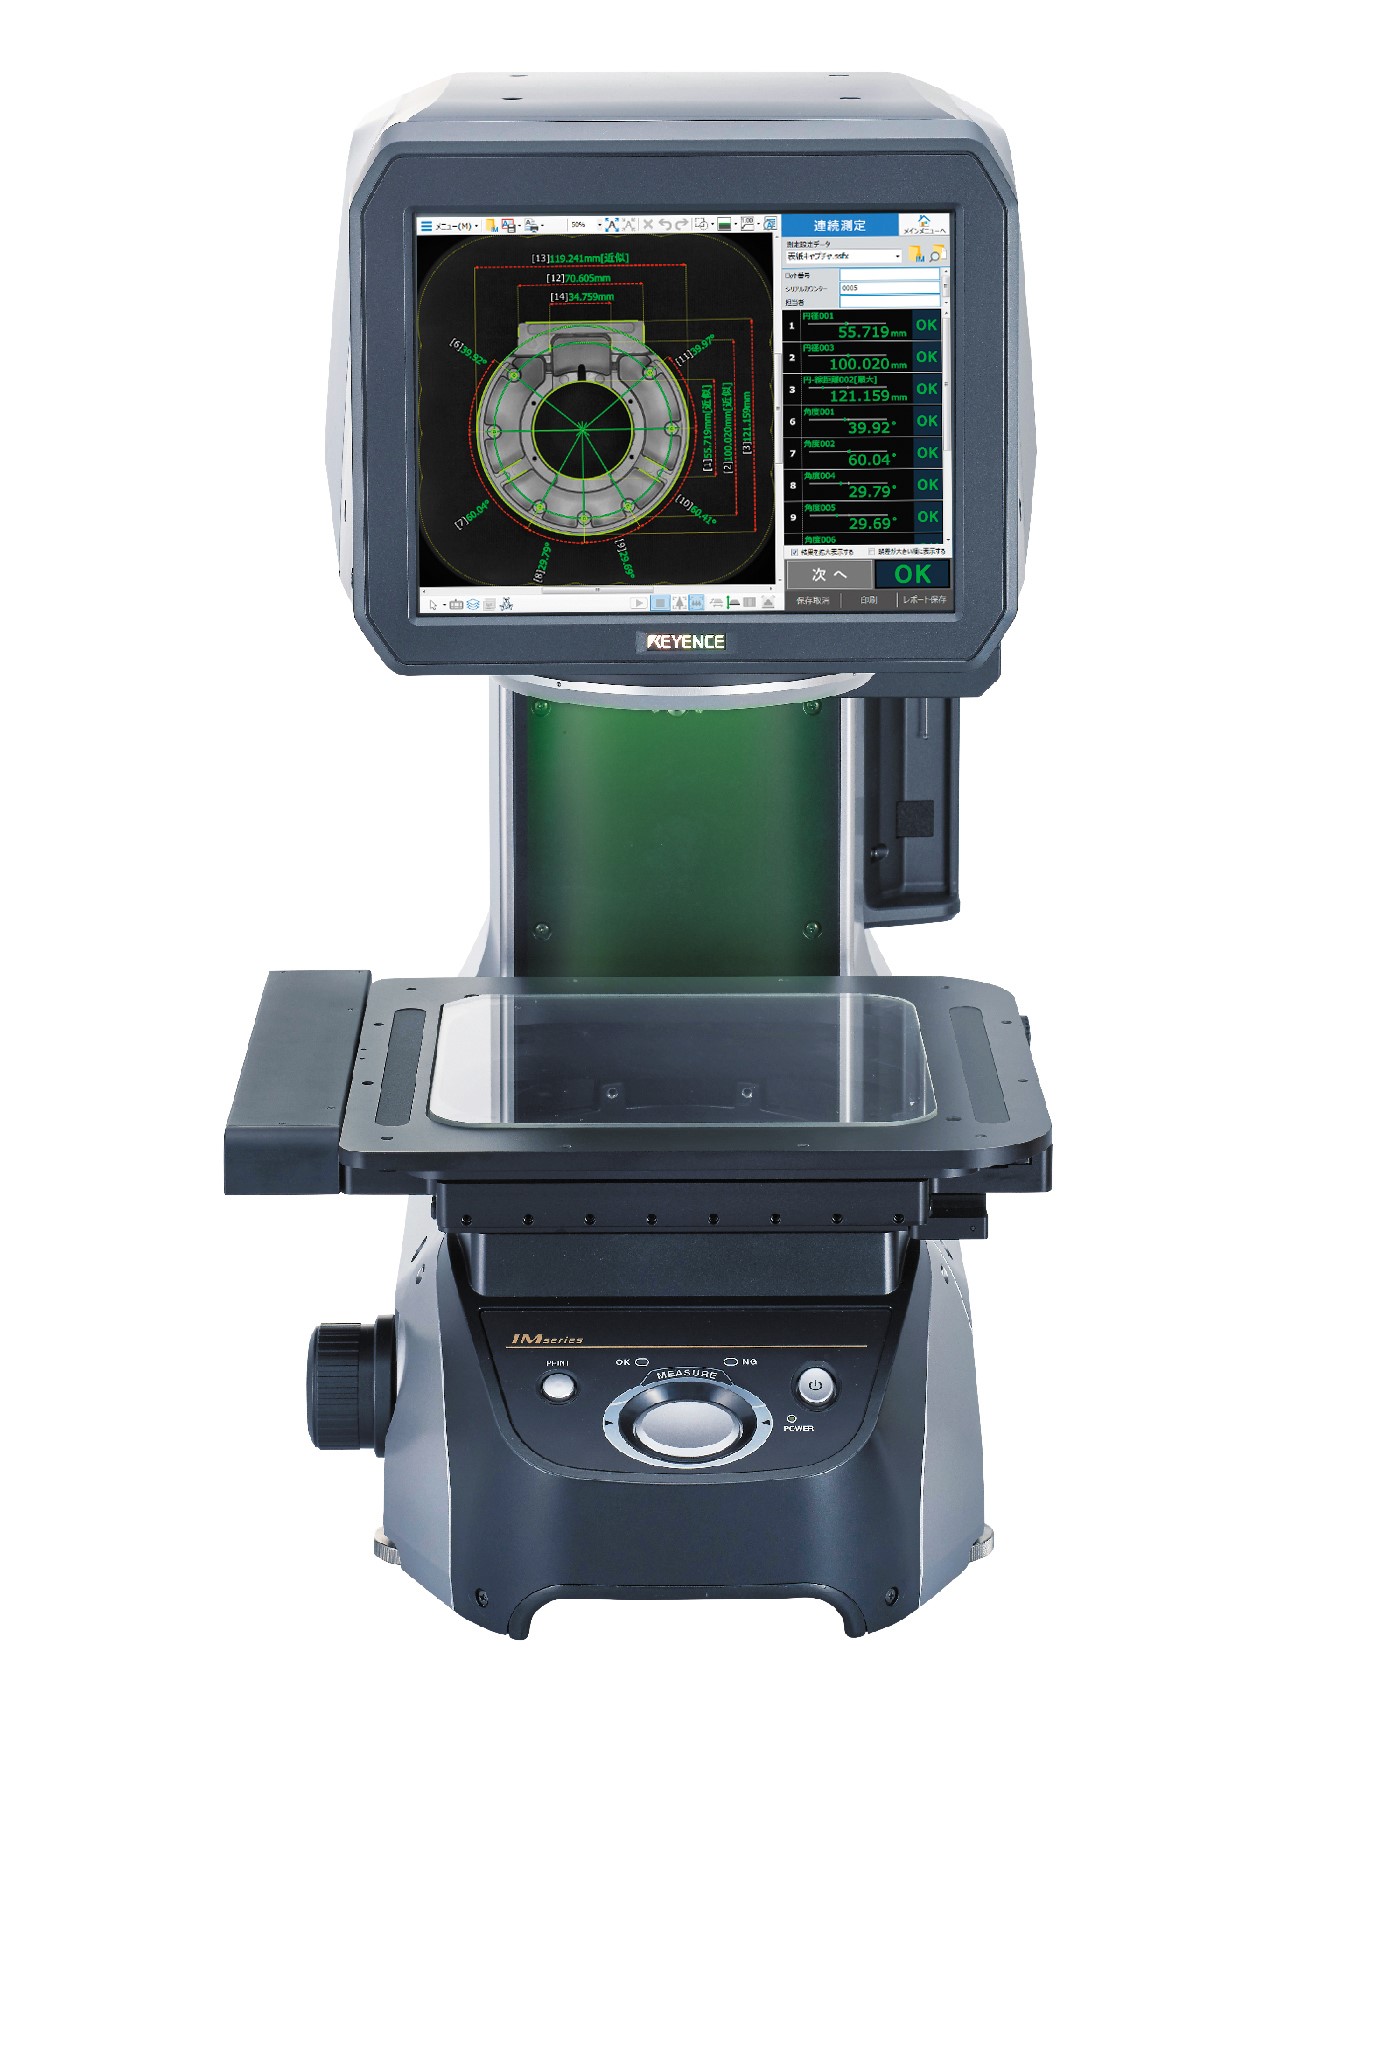 Keyence IM-7020 state of the art inspection system displaying analysis of fastener on its screen.